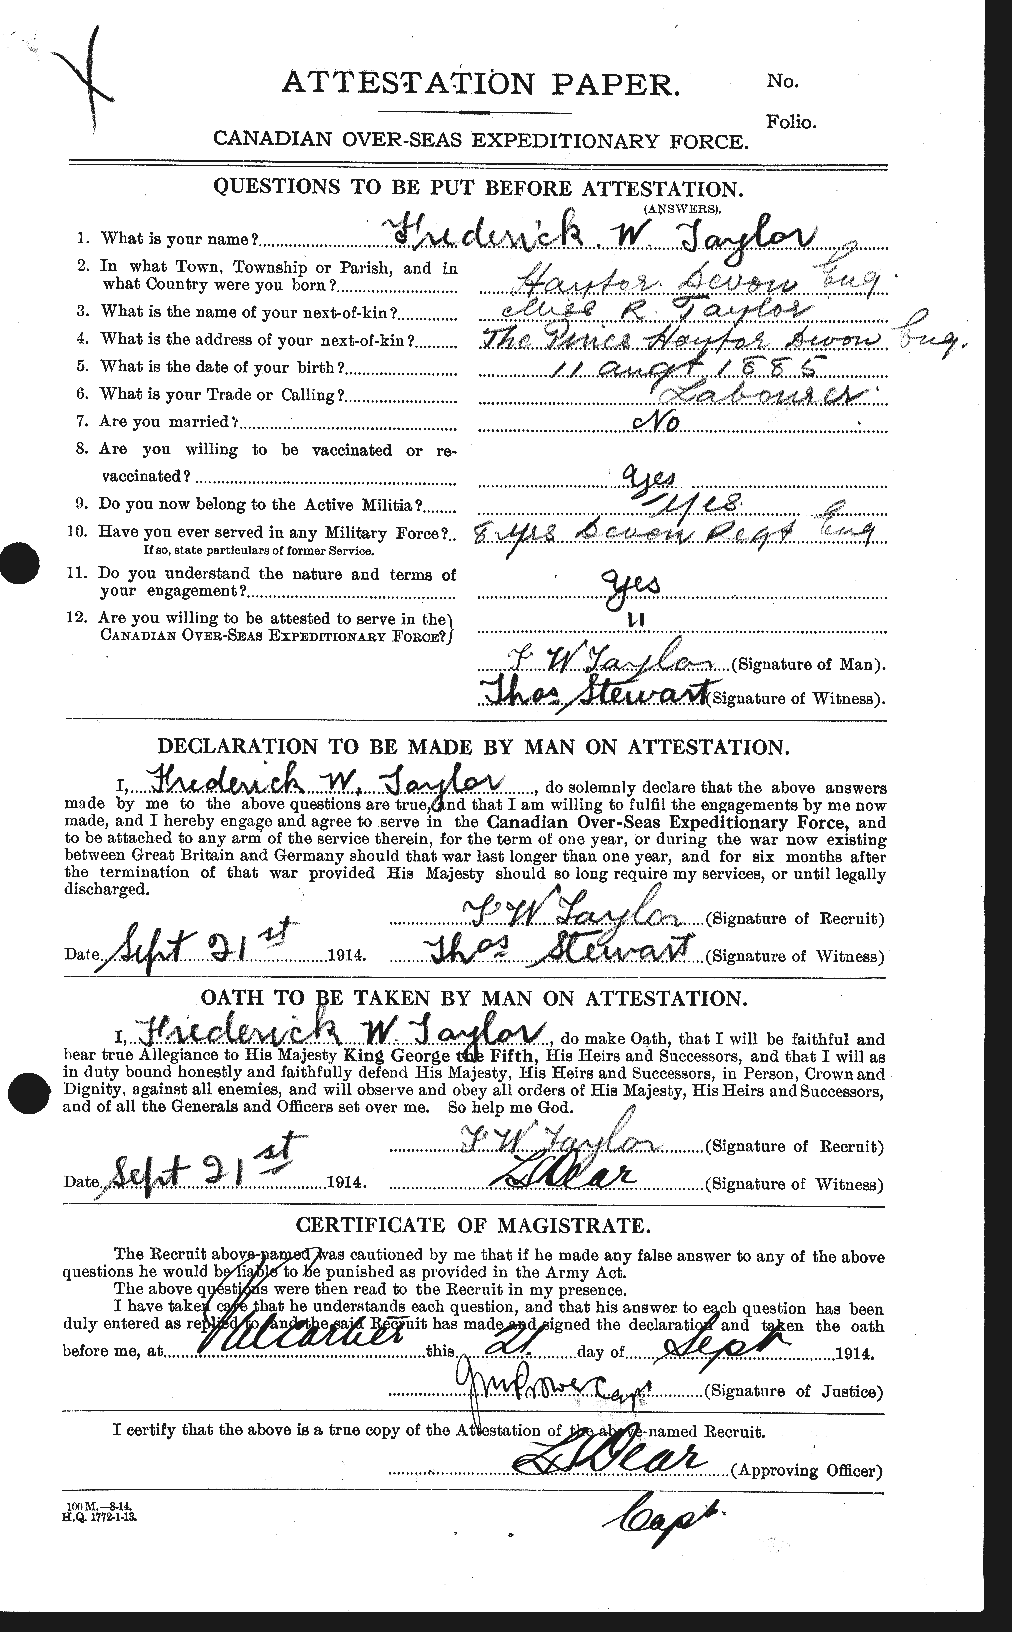 Personnel Records of the First World War - CEF 625821a